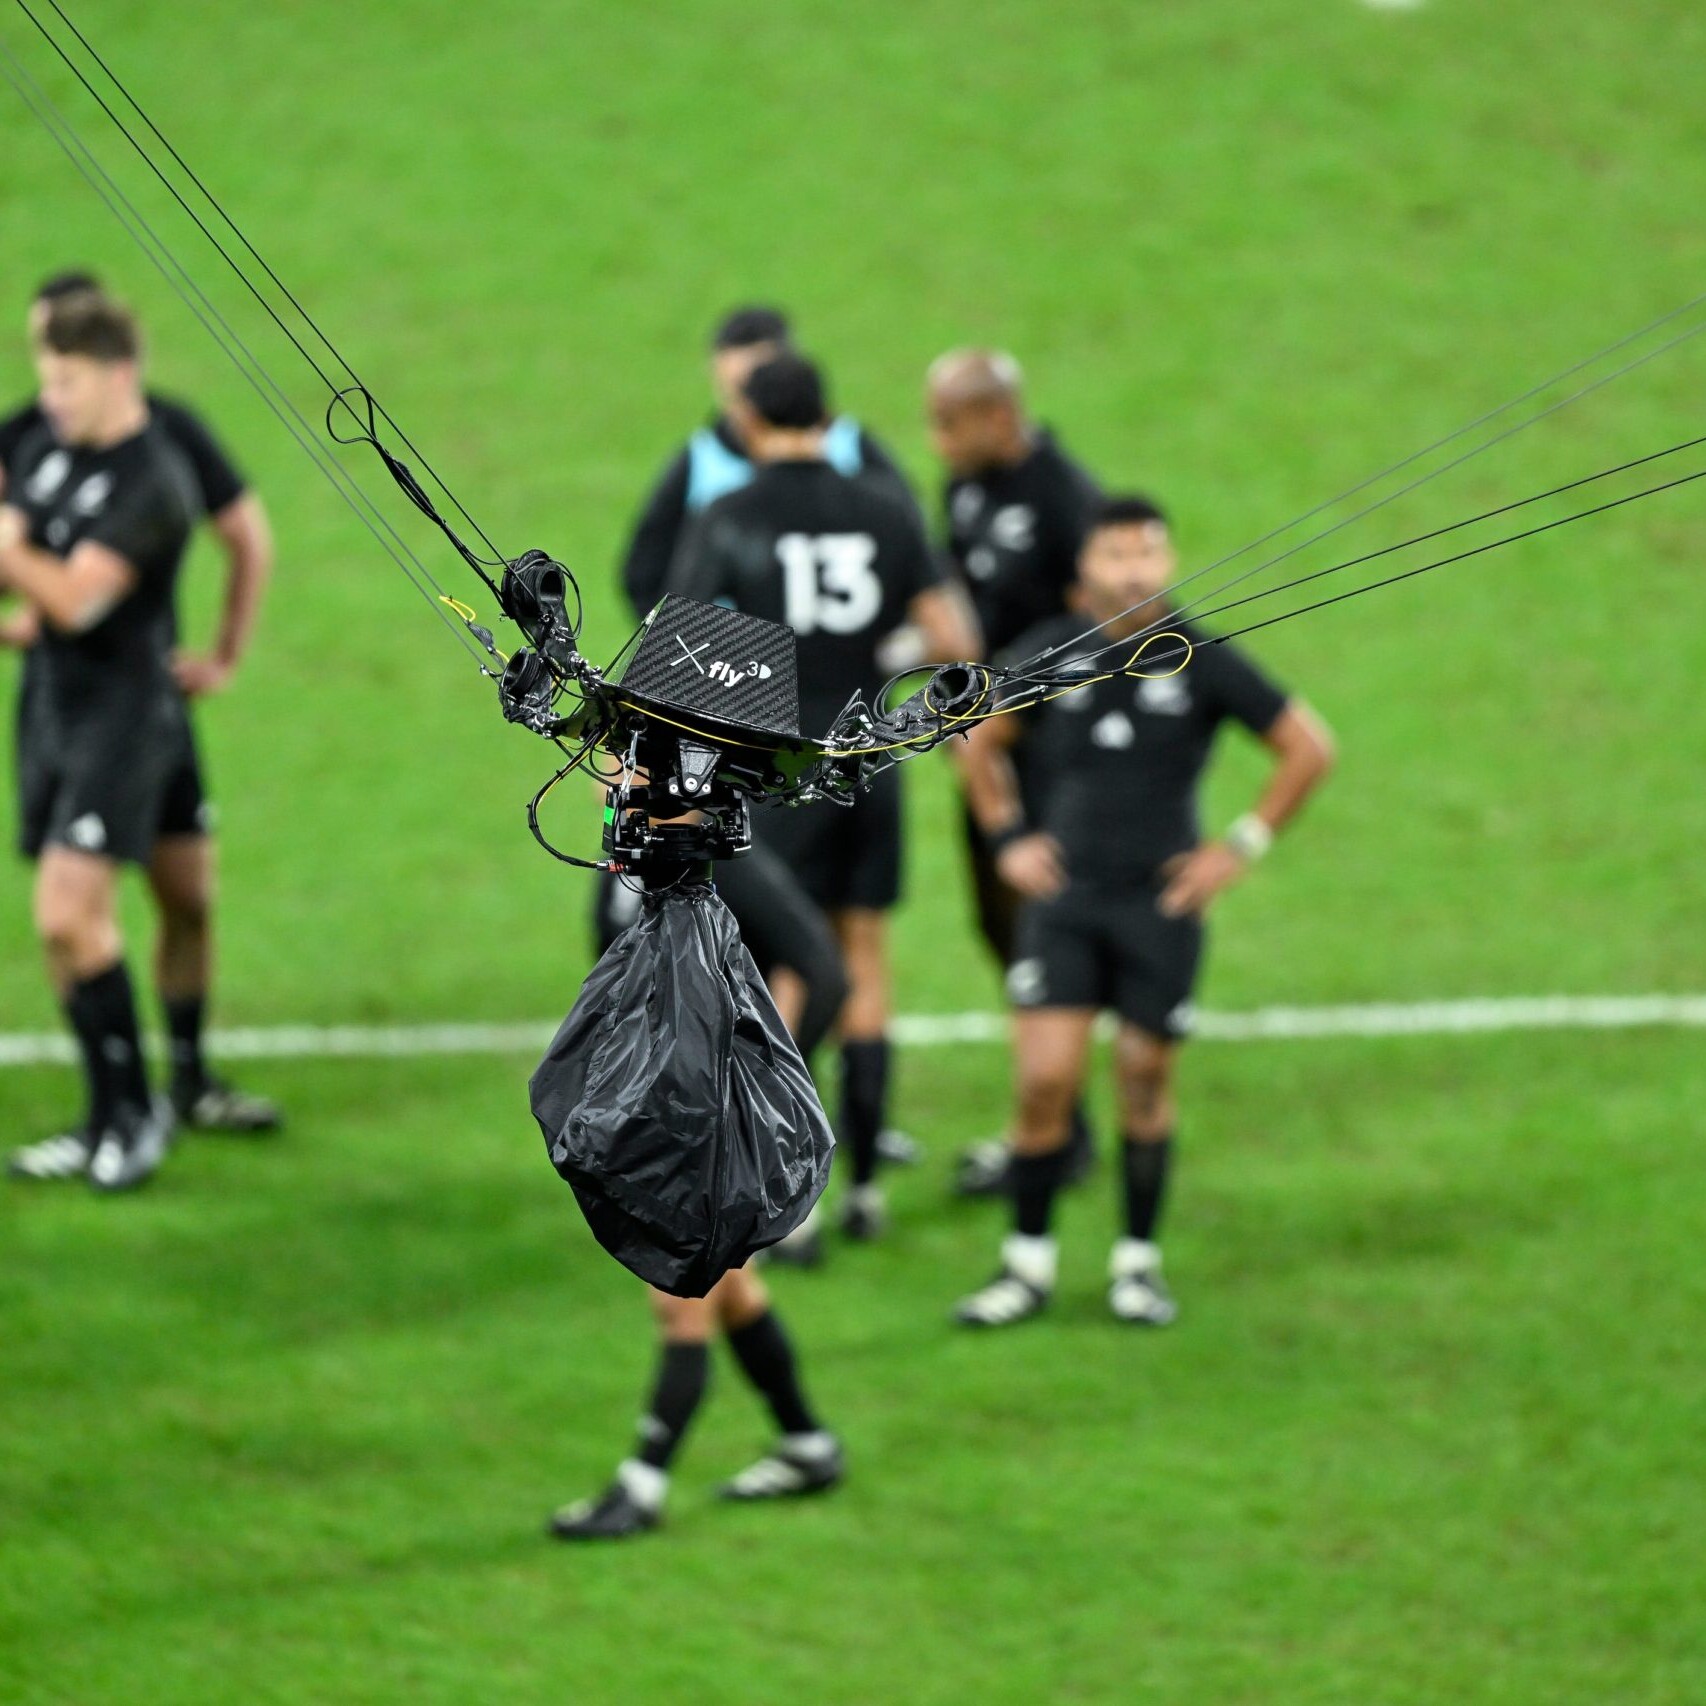 A spider cam in focus, against a blurred background of a rugby pitch.